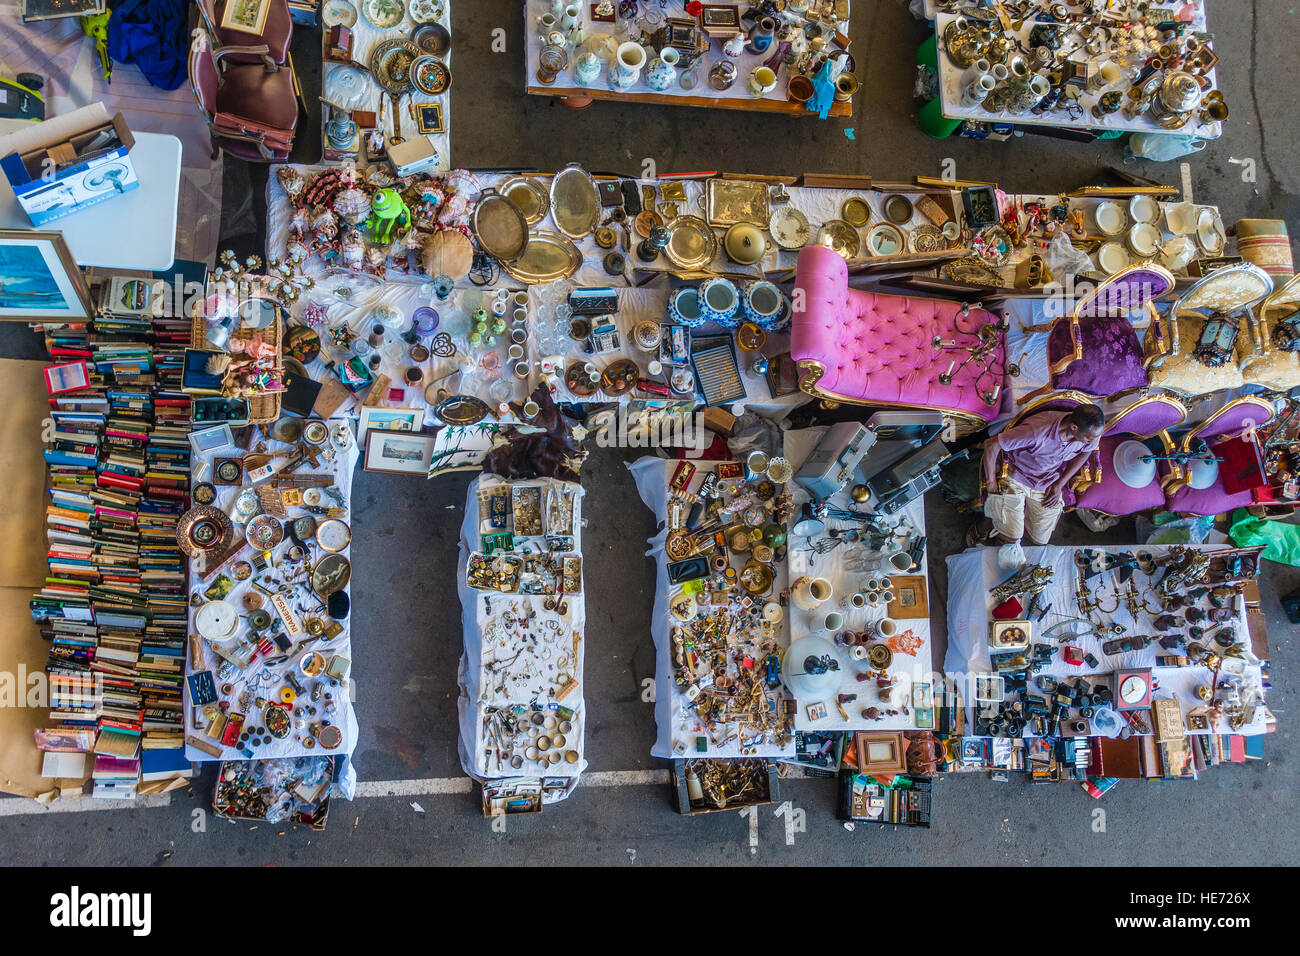 A view from above of an indoor flea market in Barcelona, Spain with an eclectic assortment of items for sale and a male vendor. Stock Photo